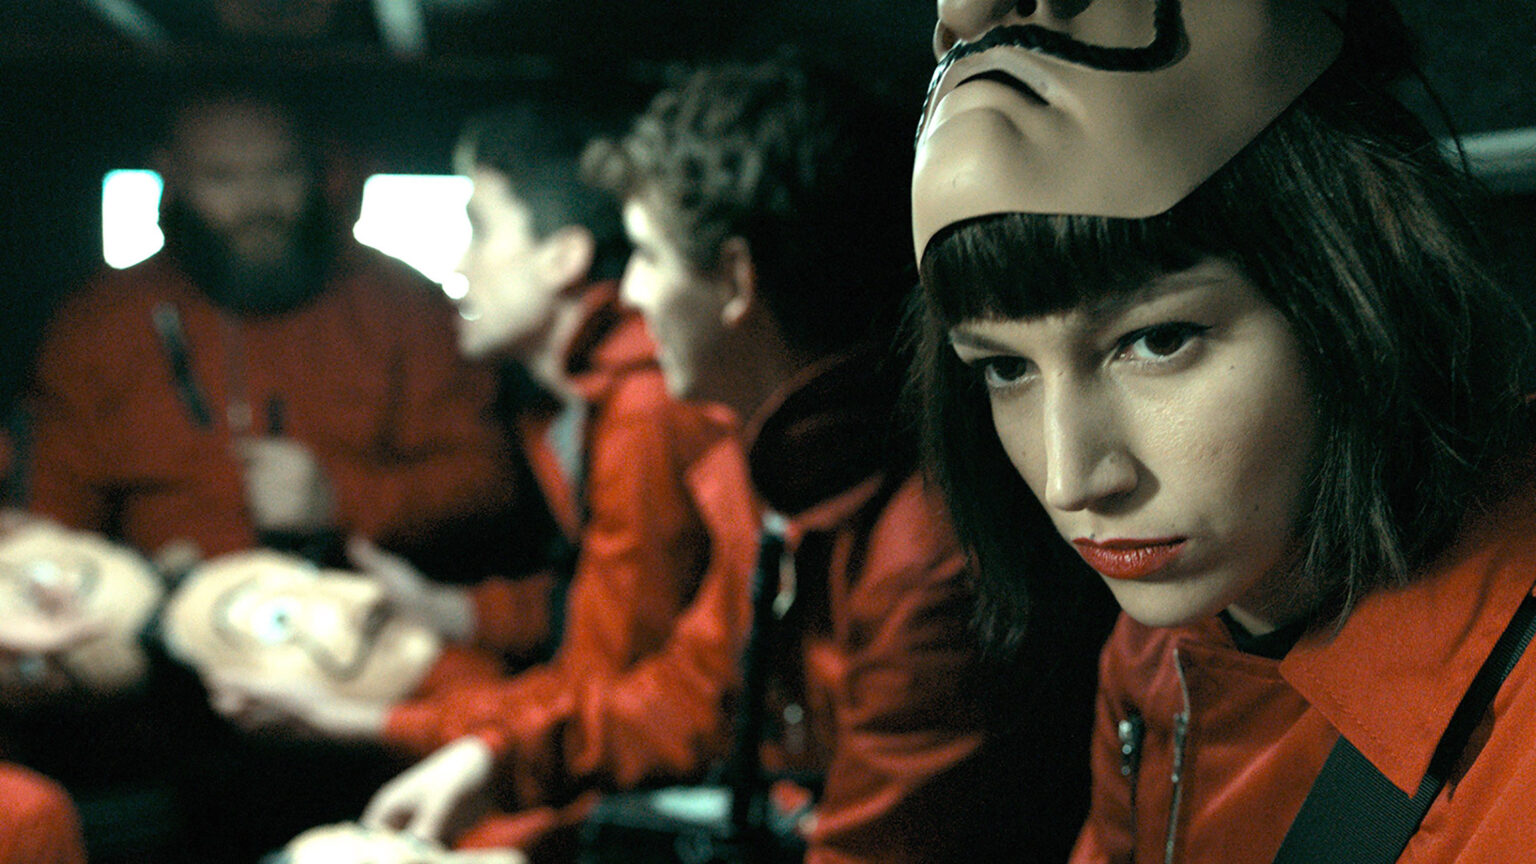 In anticipation of 'Money Heist' season 5 we've collected all the fan theories that sound a little bit out there.